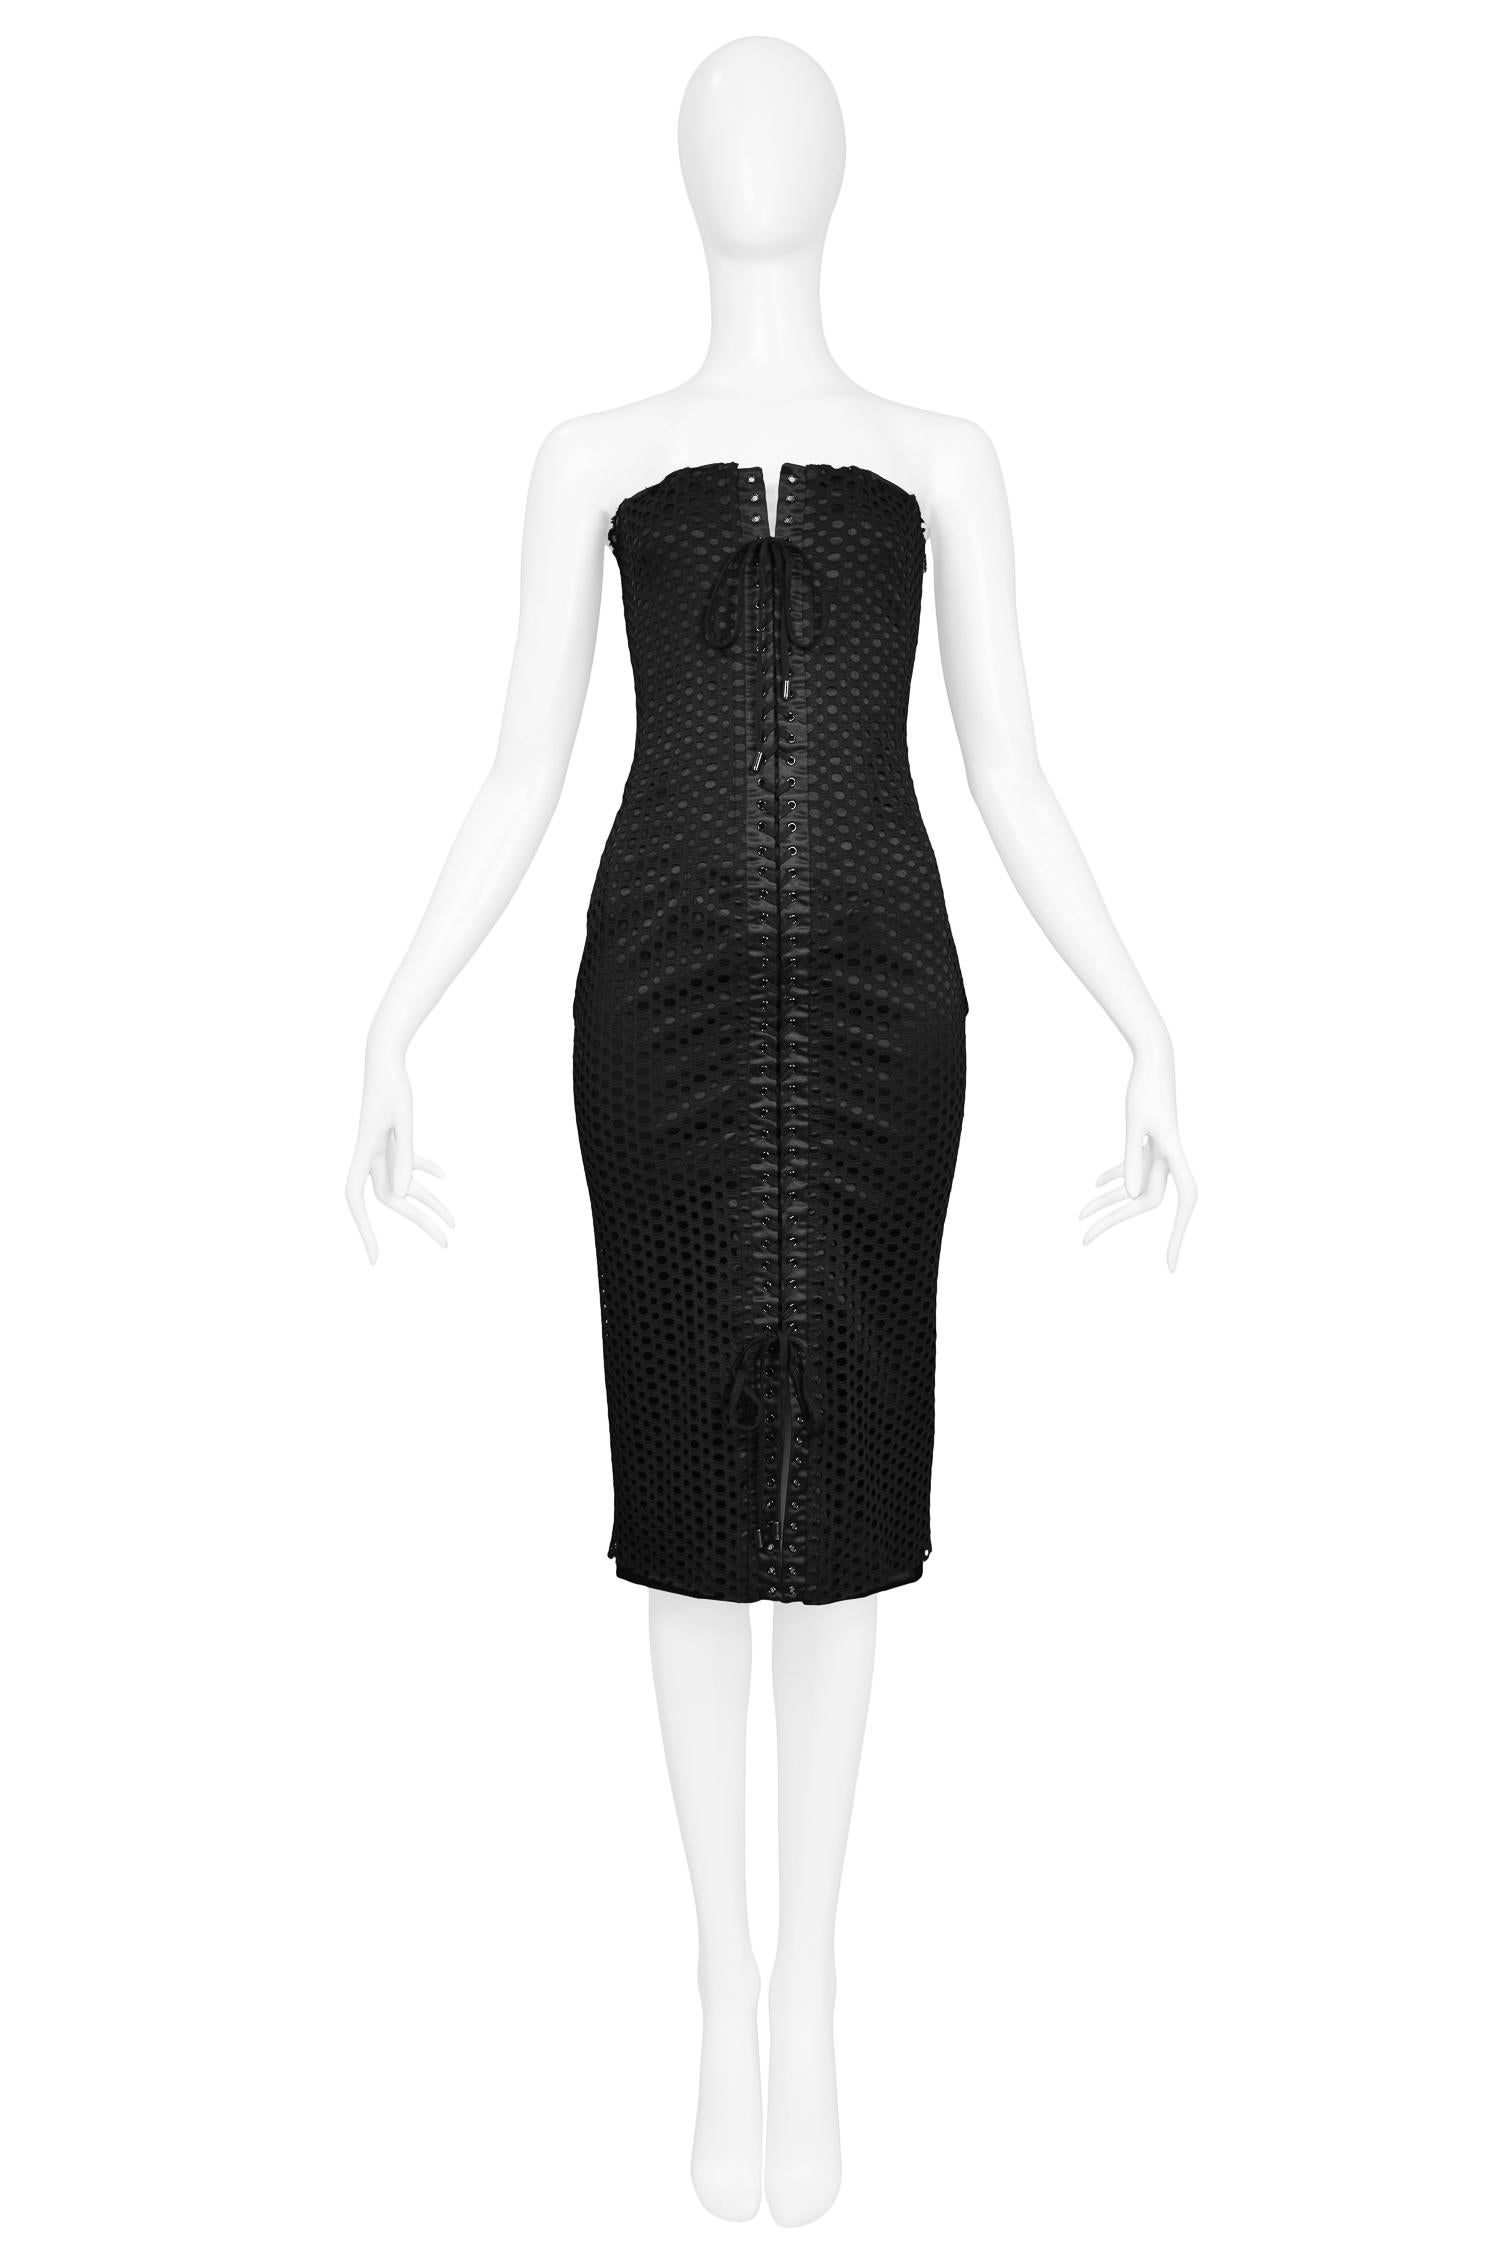 Vintage Dolce & Gabbana black strapless corset dress featuring a perforated mesh overlay and double corseting lace-up detail at the front and back of the dress.

Excellent Condition.

Size: 38